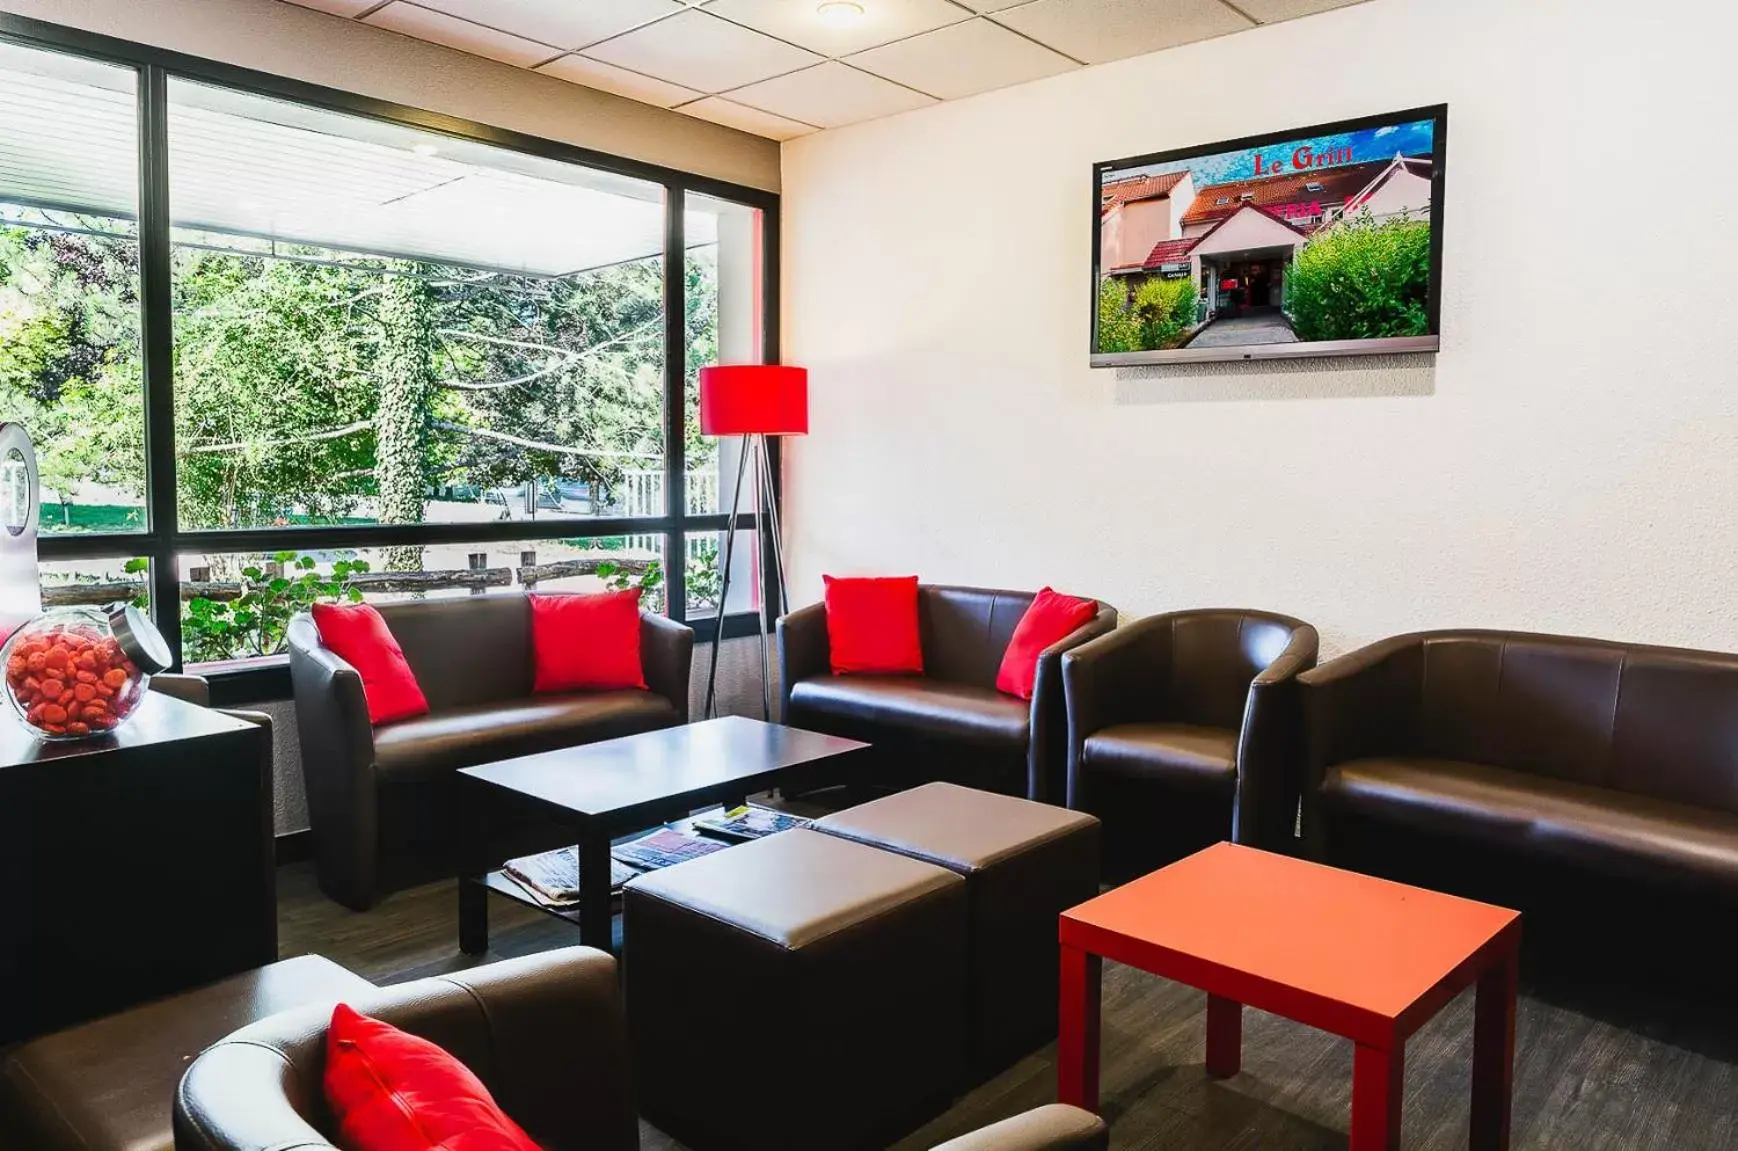 Communal lounge/ TV room in Logis Hotel Lons-le-Saunier - Restaurant Le Grill